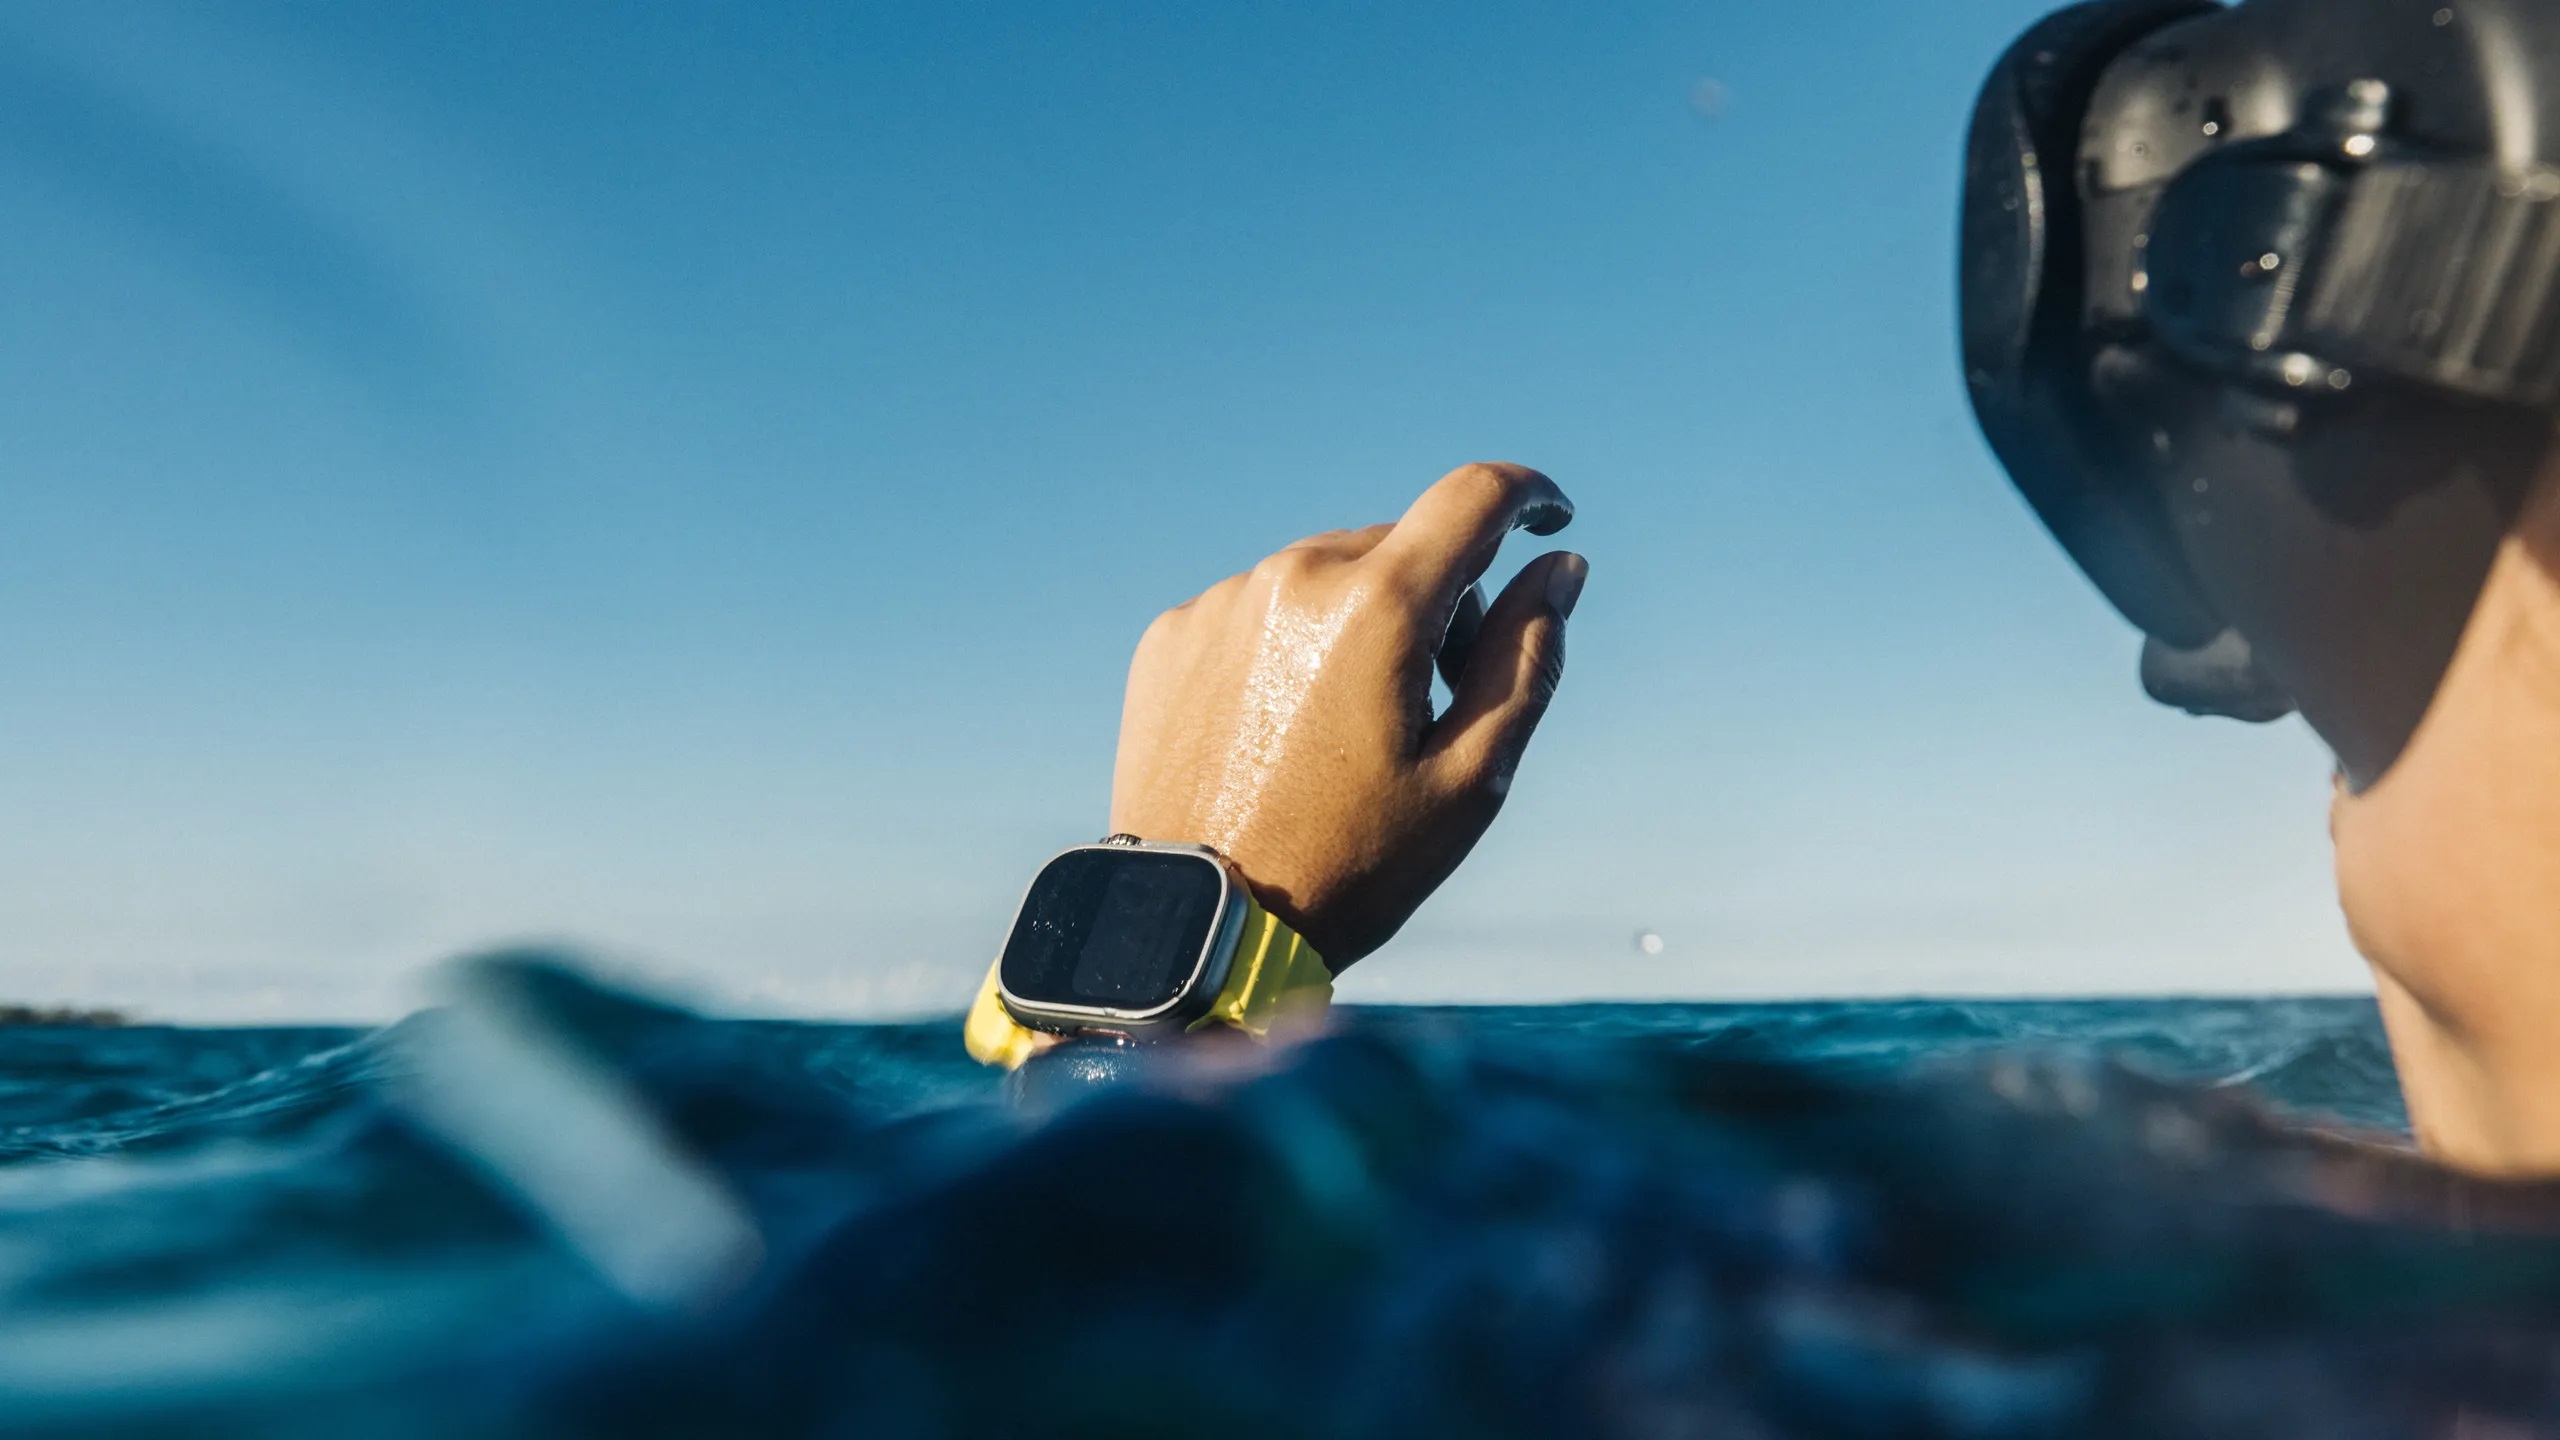 Apple has launched a new service - testing the Apple Watch Ultra smartwatch for water resistance